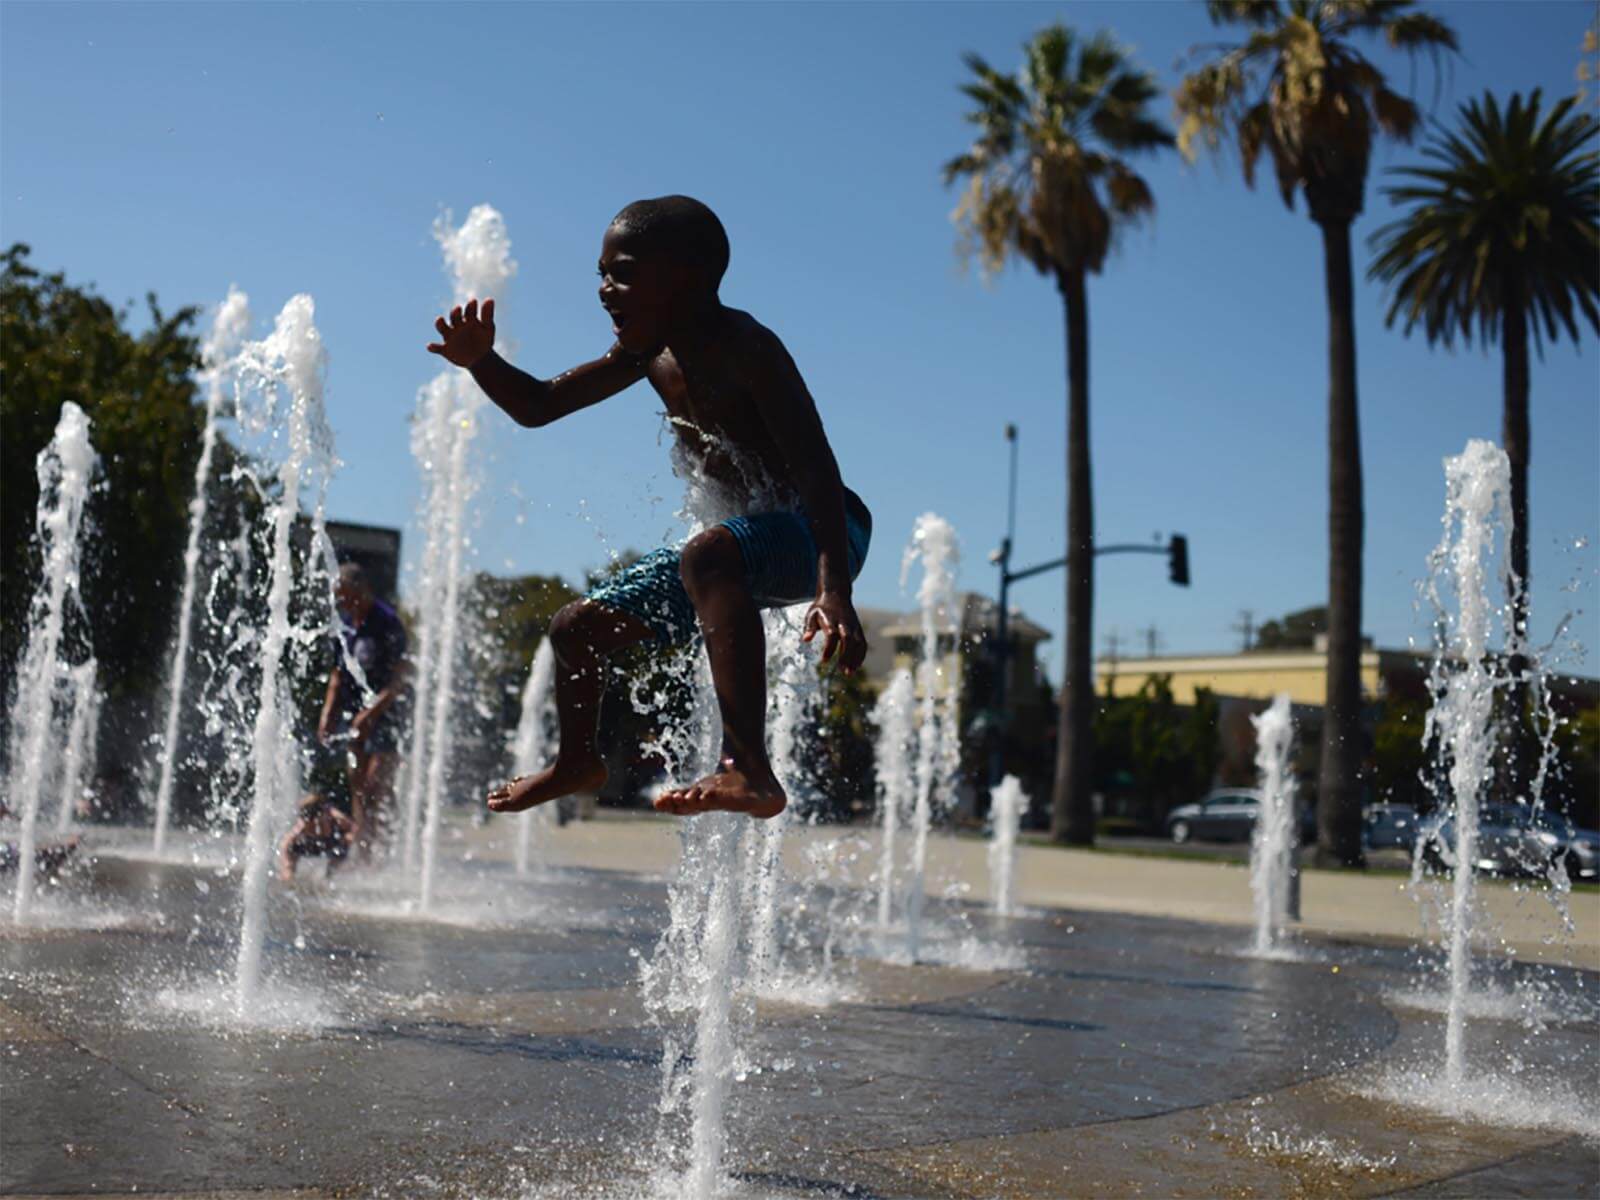 Child playing in public water fountain in Fairfield, CA